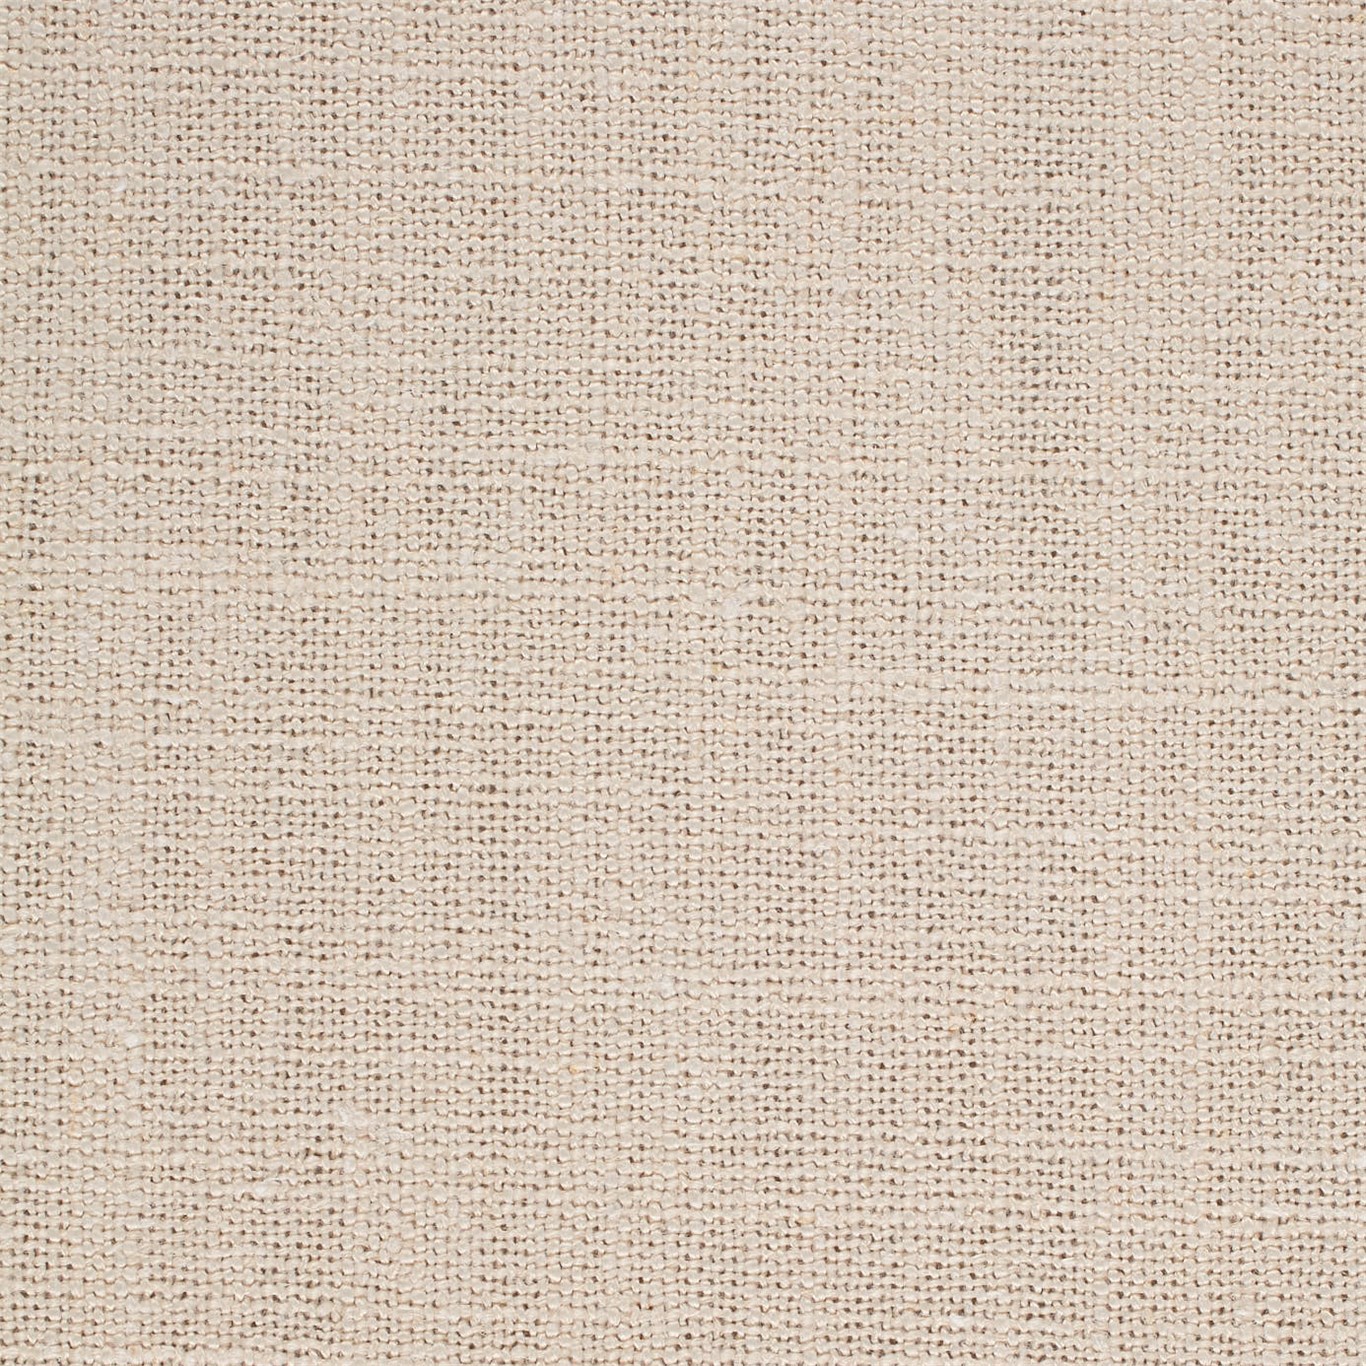 Lagom Natural Fabric by SAN